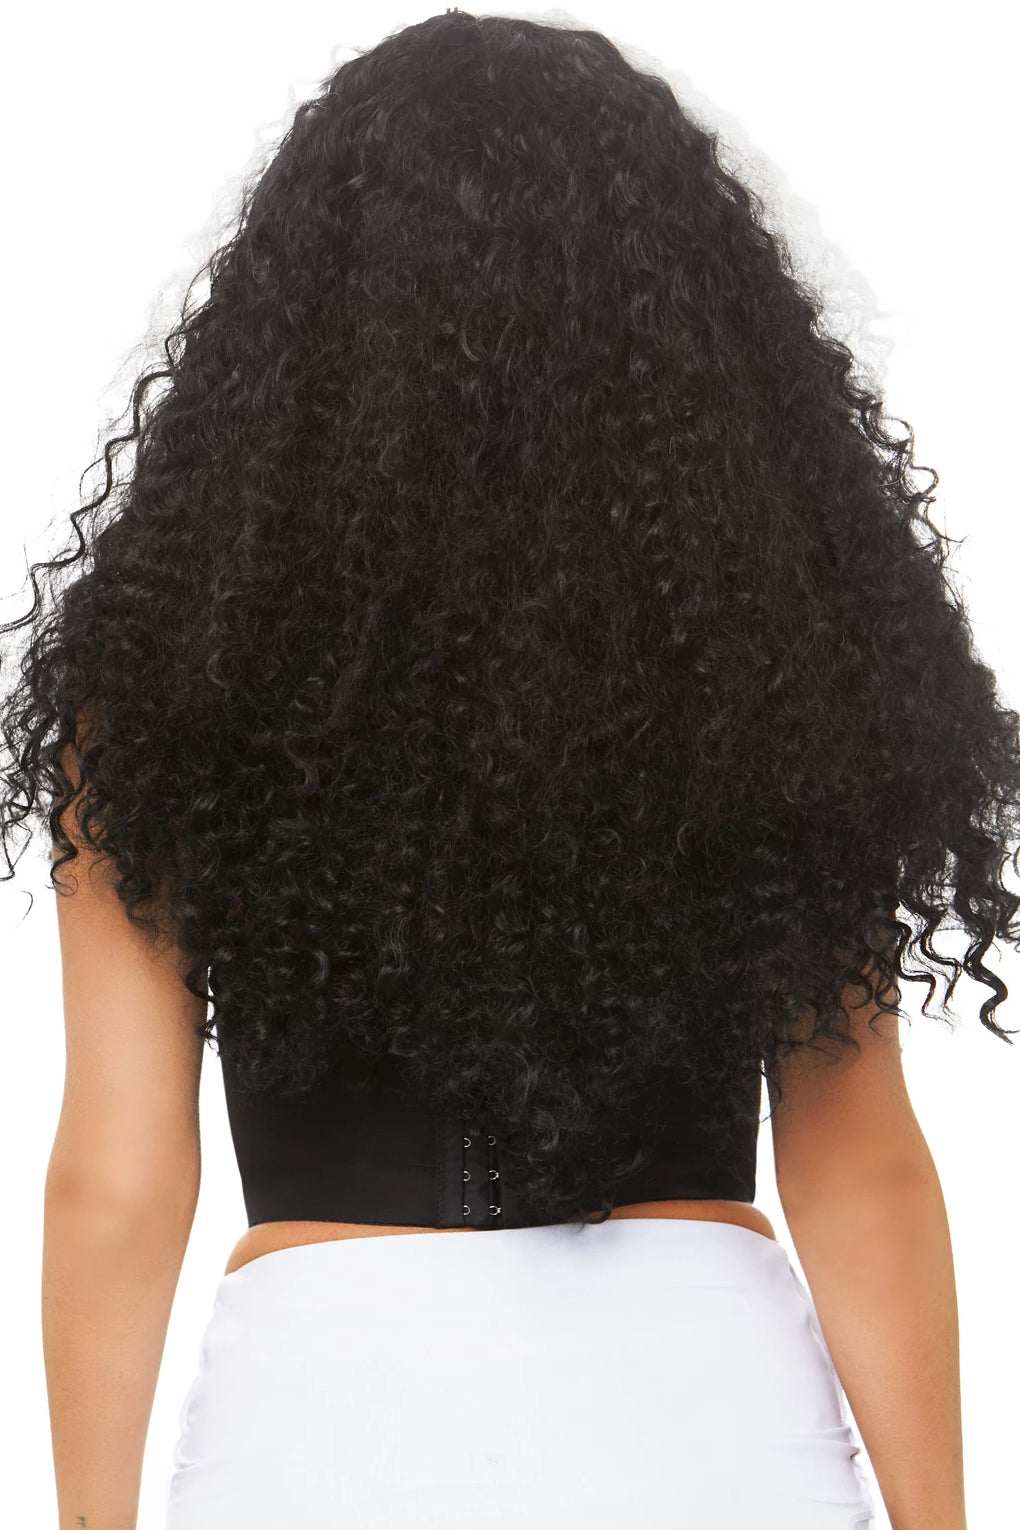 Long Curly Black/White Wig